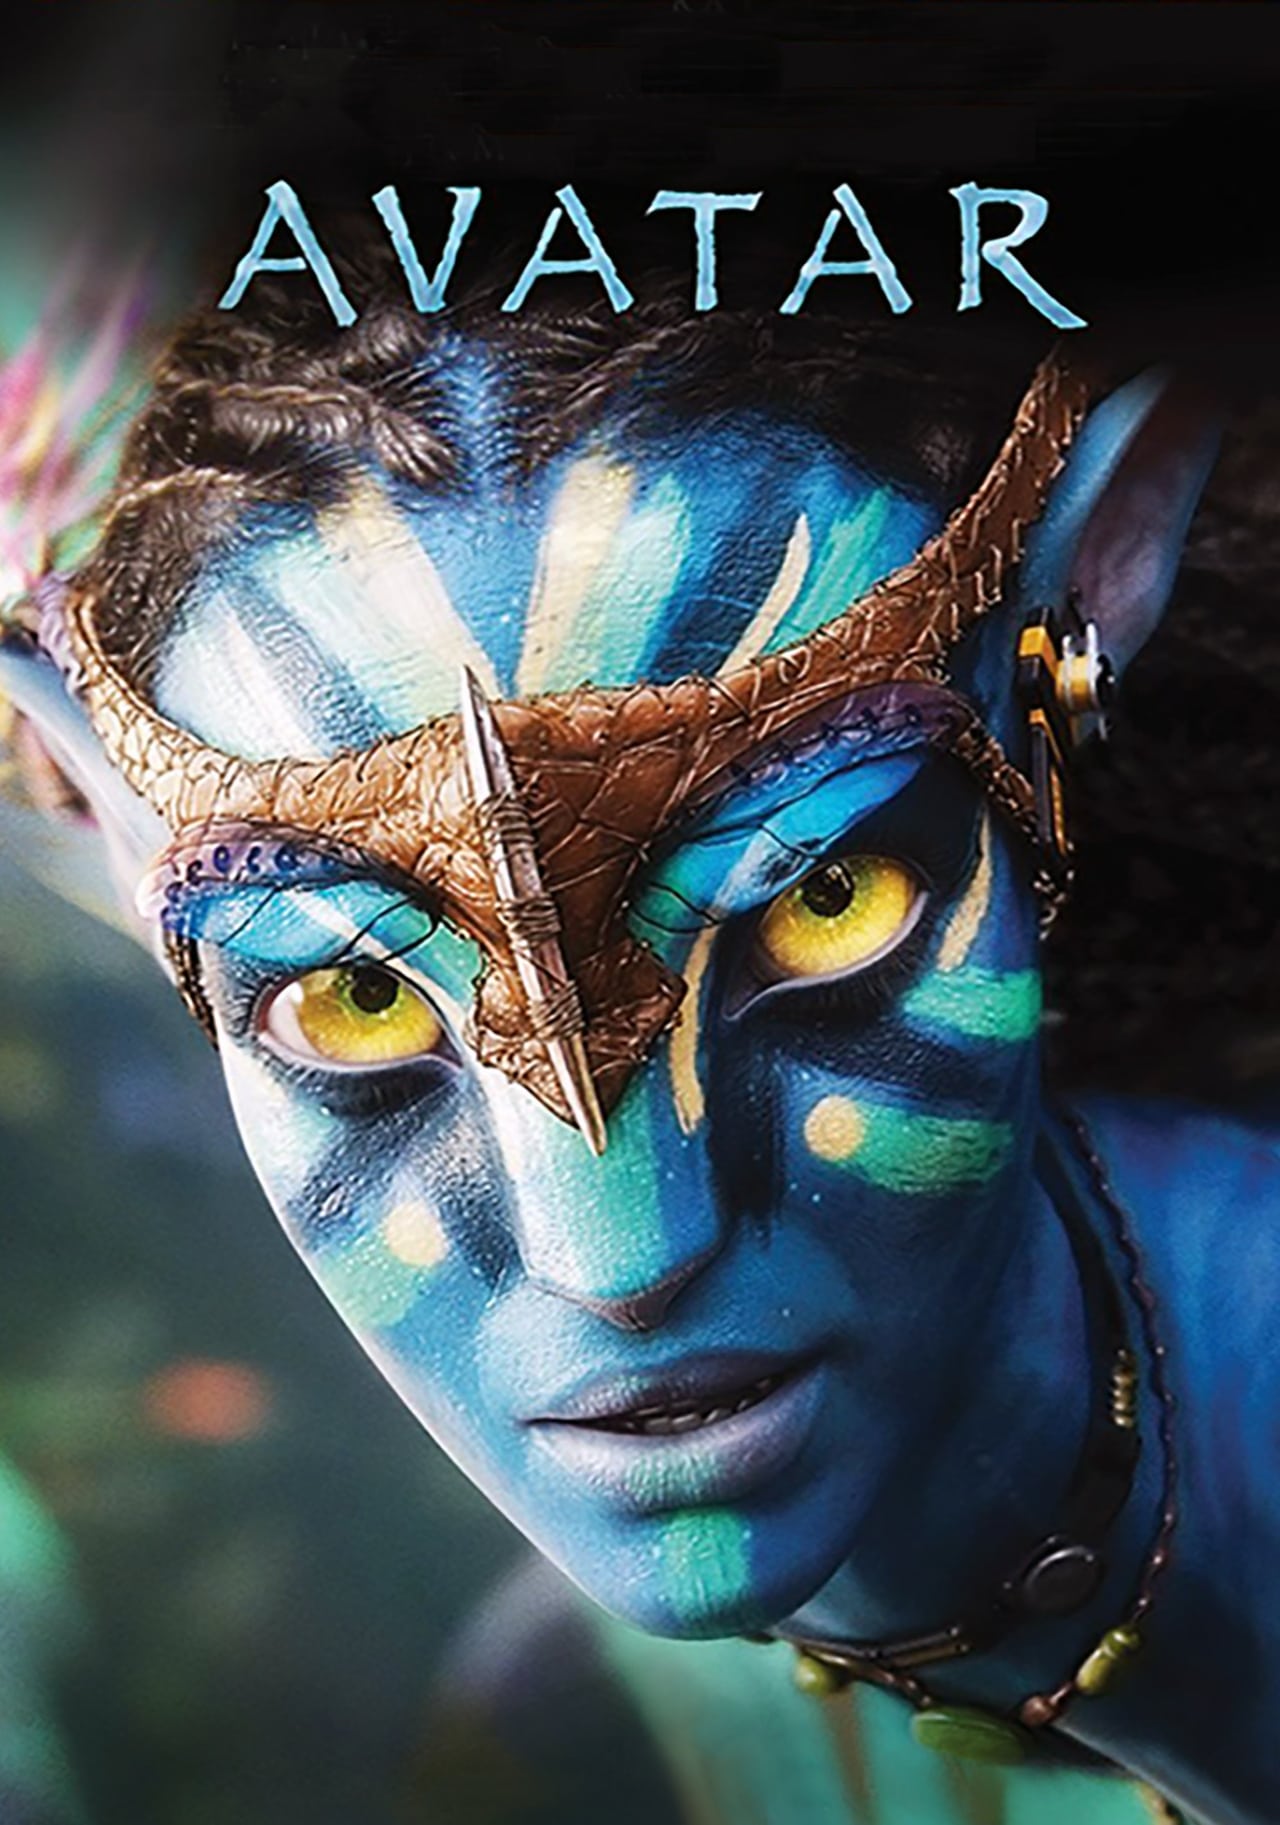 avatar movie review ndtv